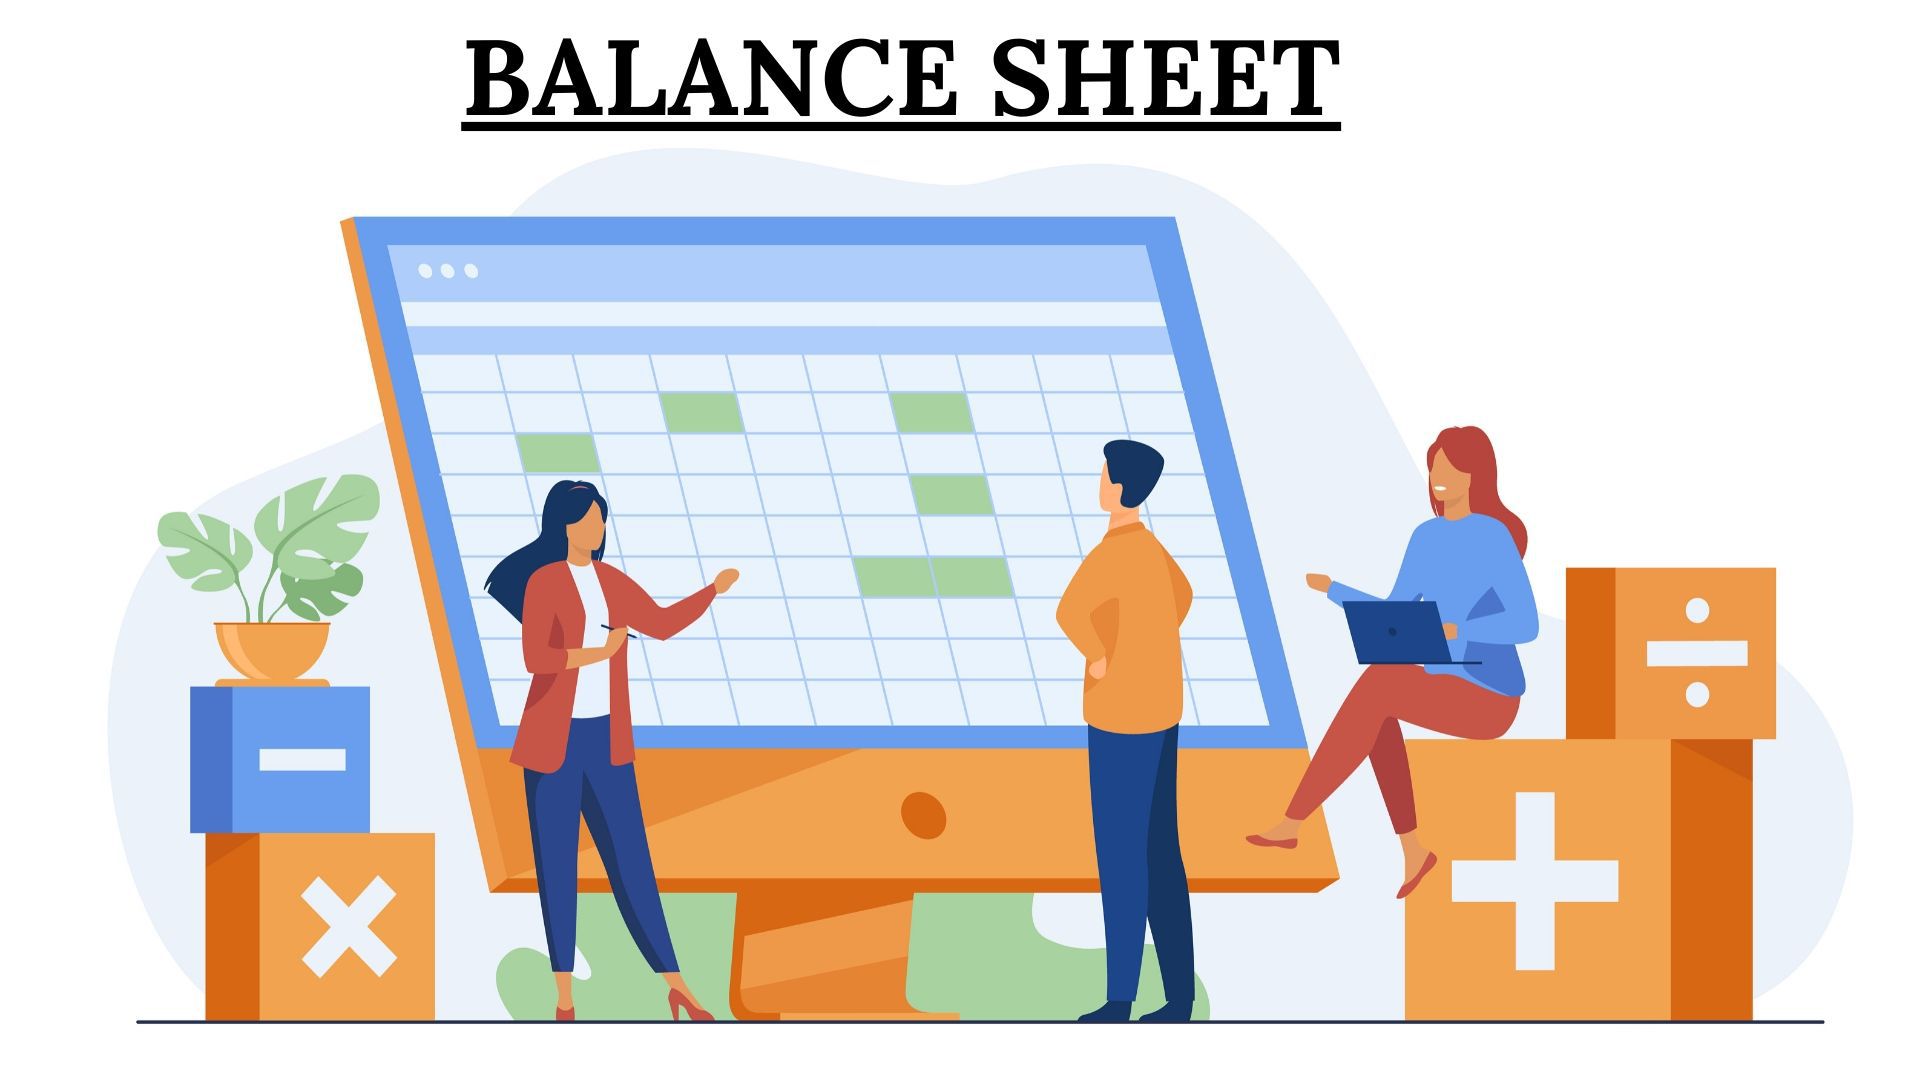 What is on a balance sheet